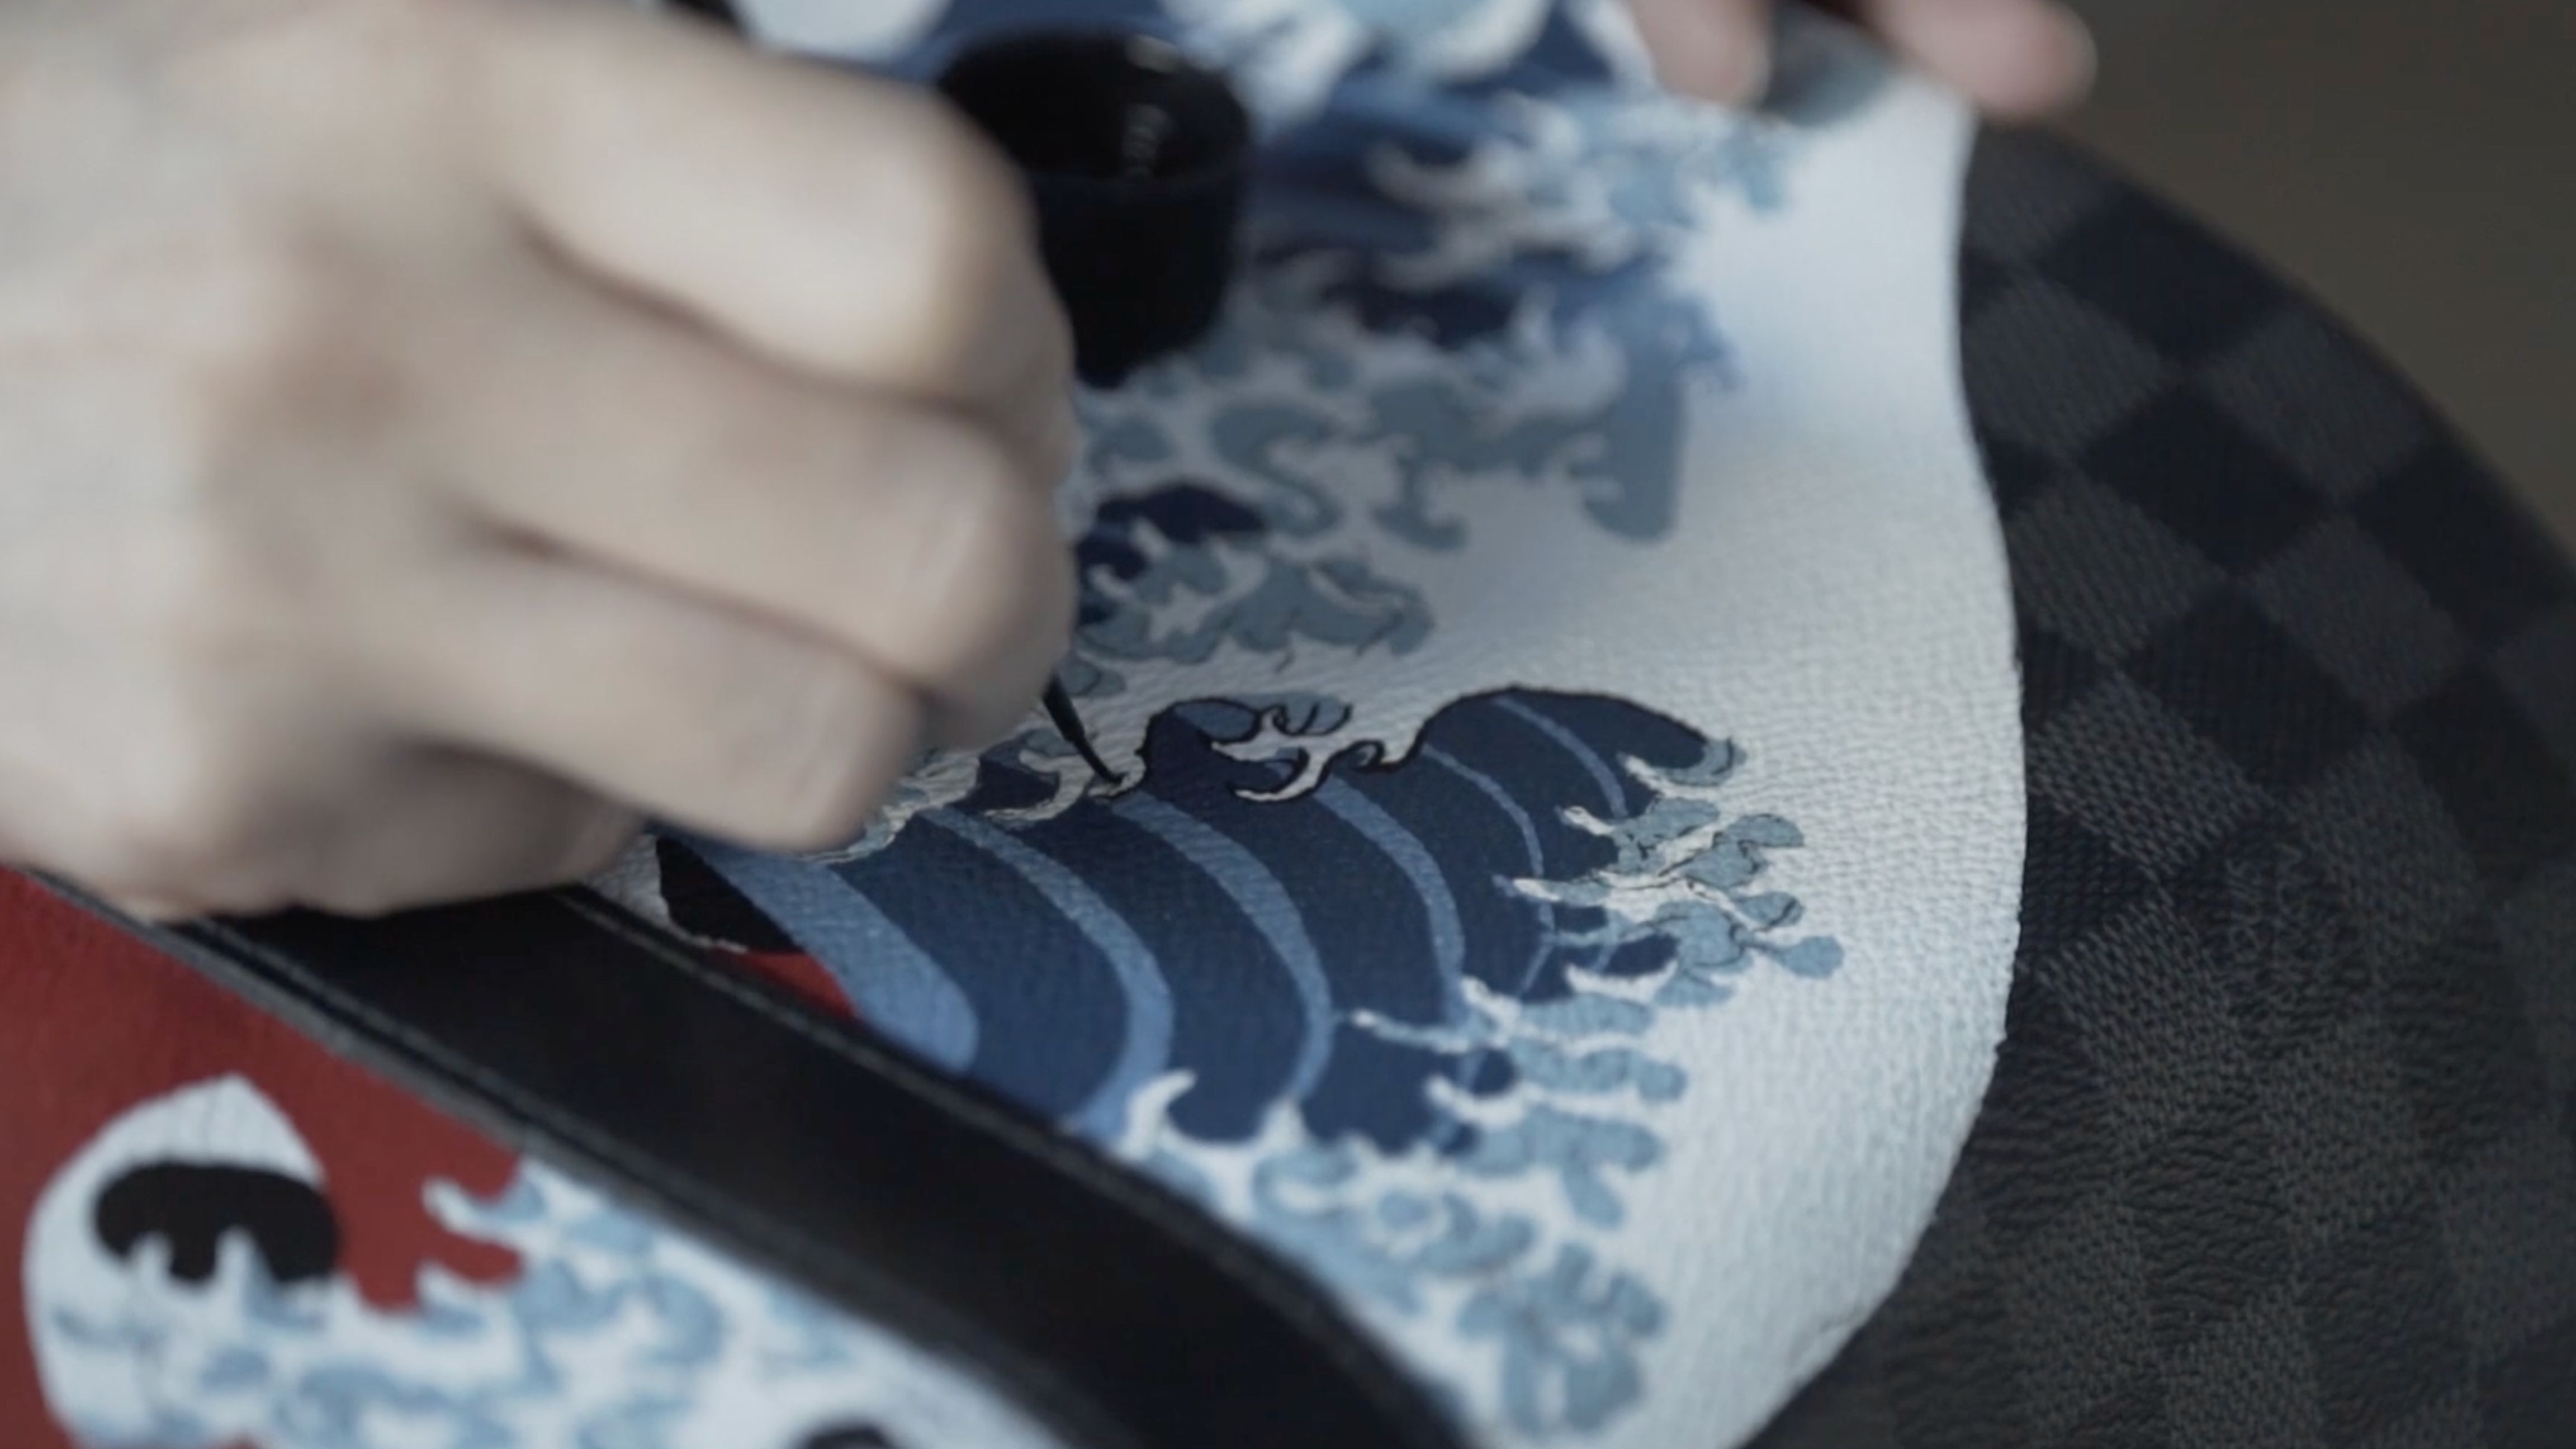 Cherin Sim On What It Means To Professionally Paint On Designer Bags